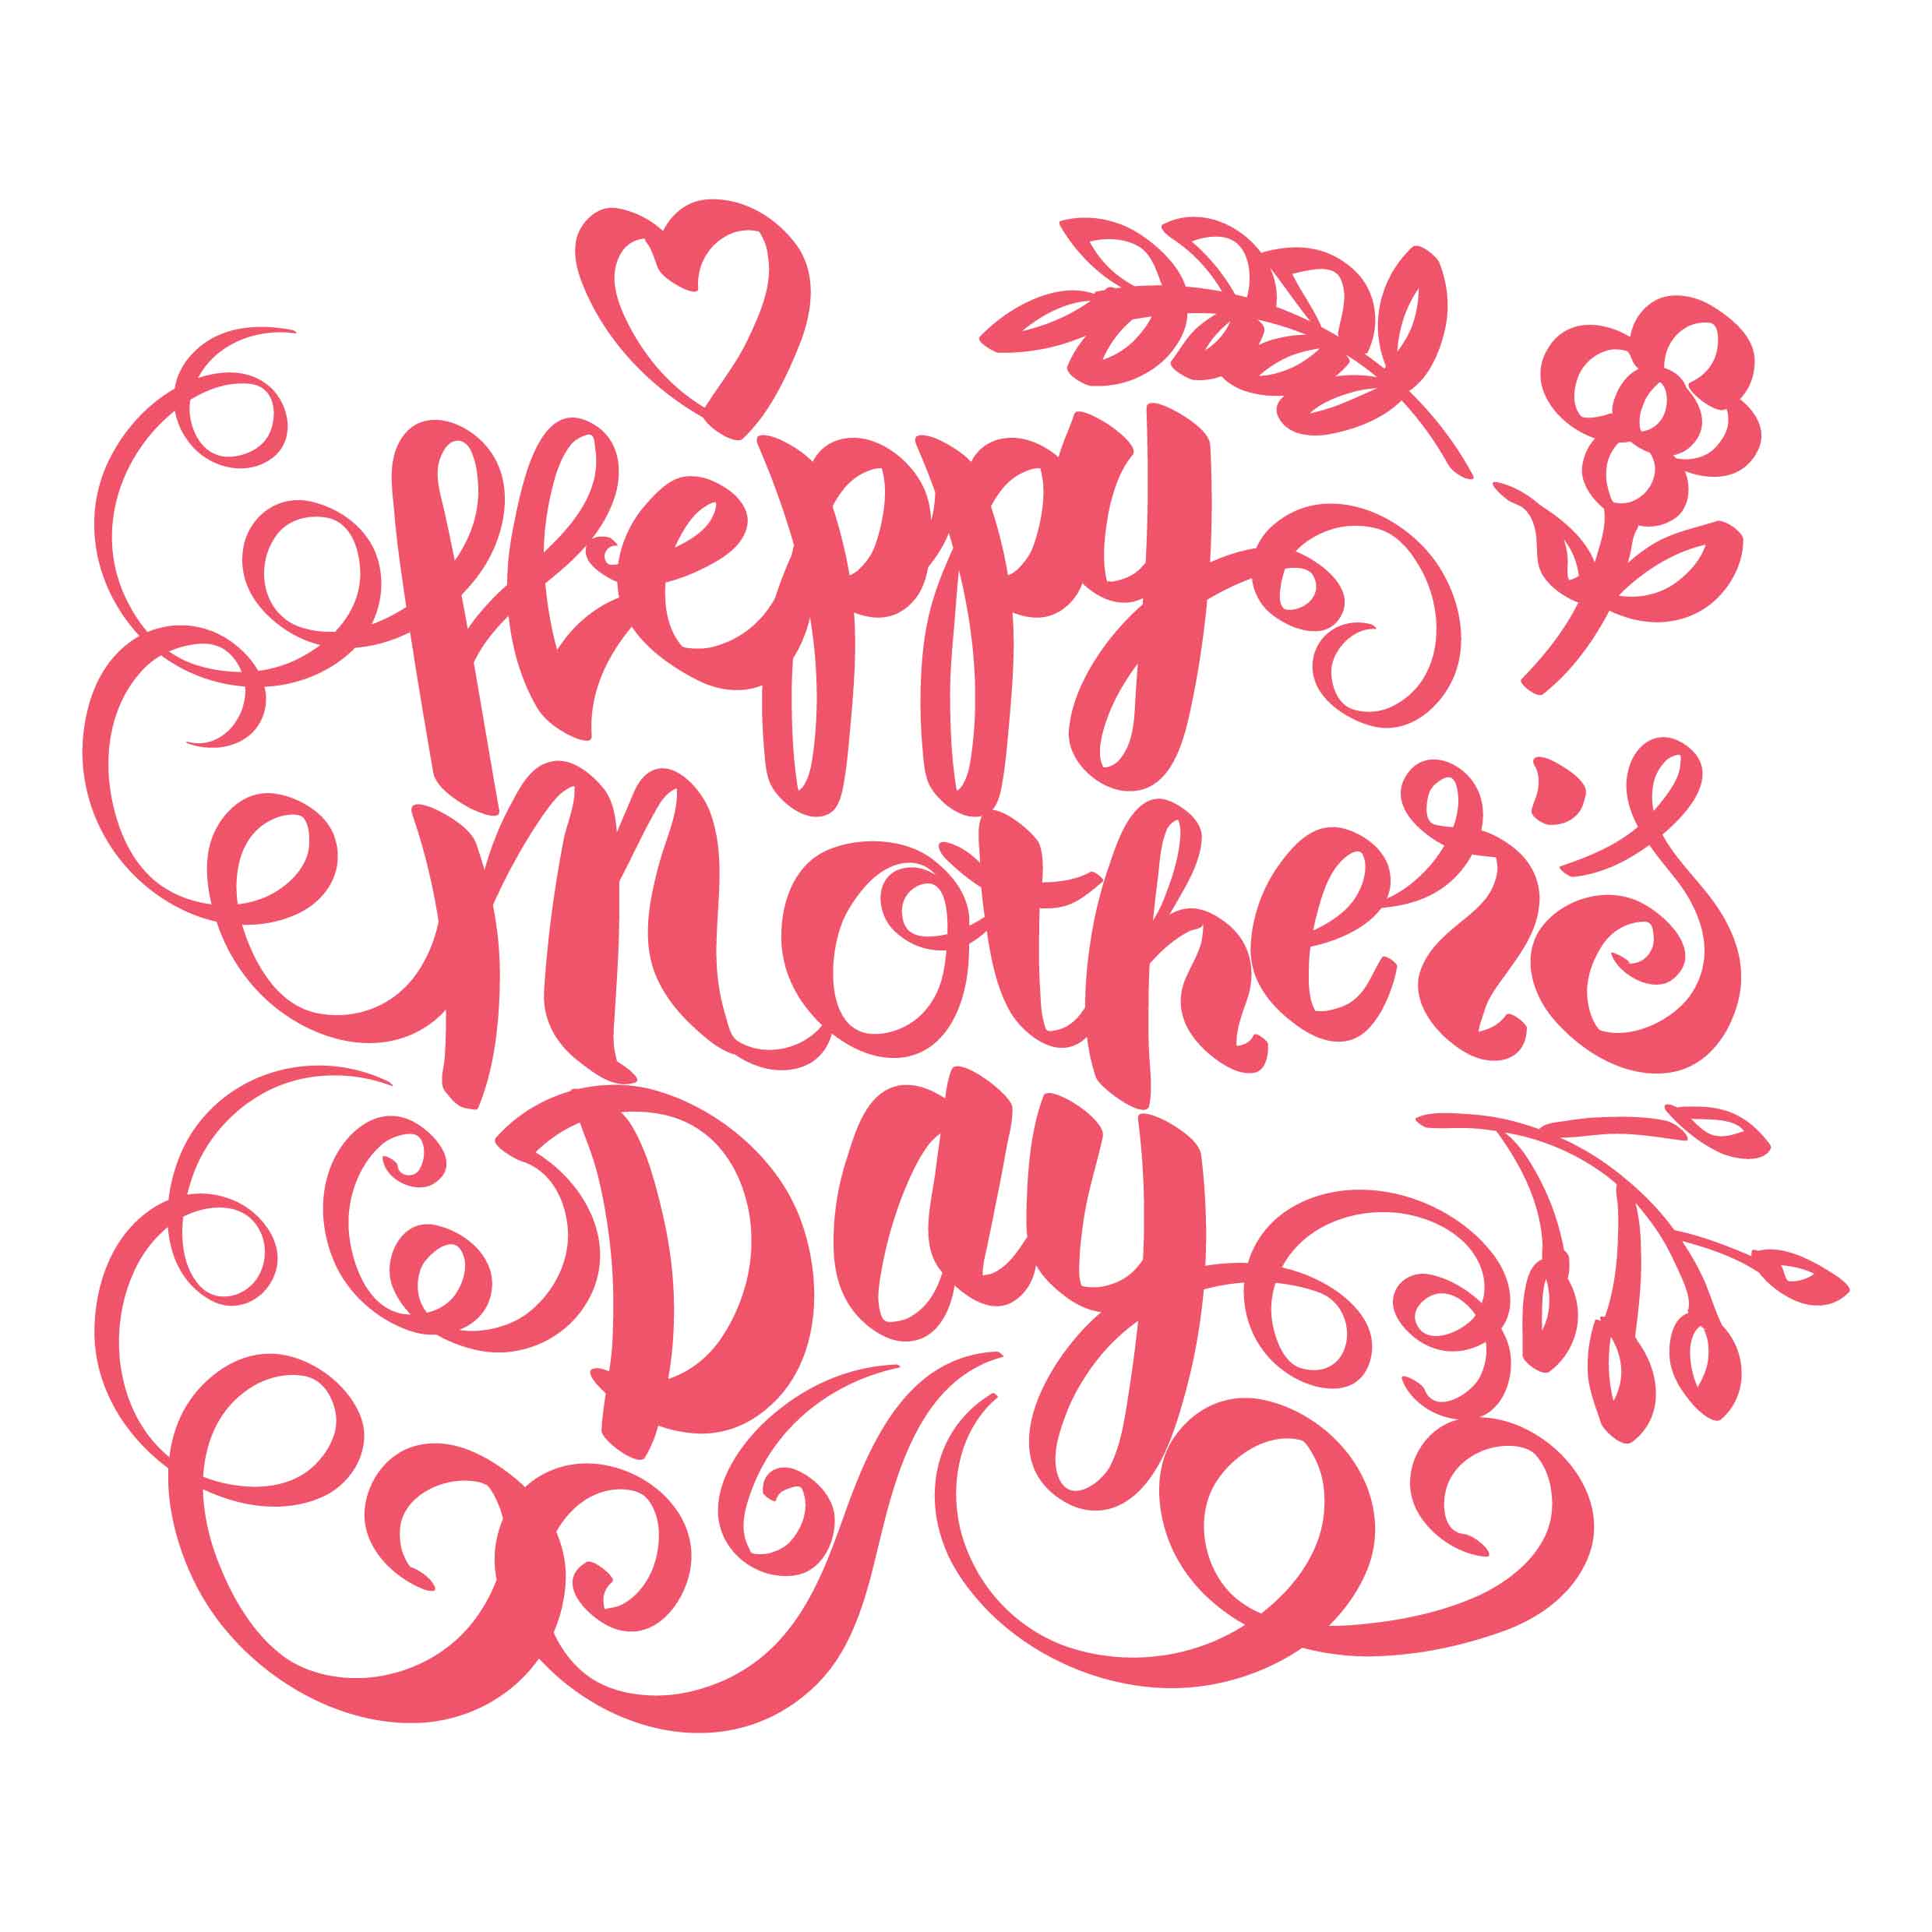 Download happy mothers day card - Download Free Vectors, Clipart ...